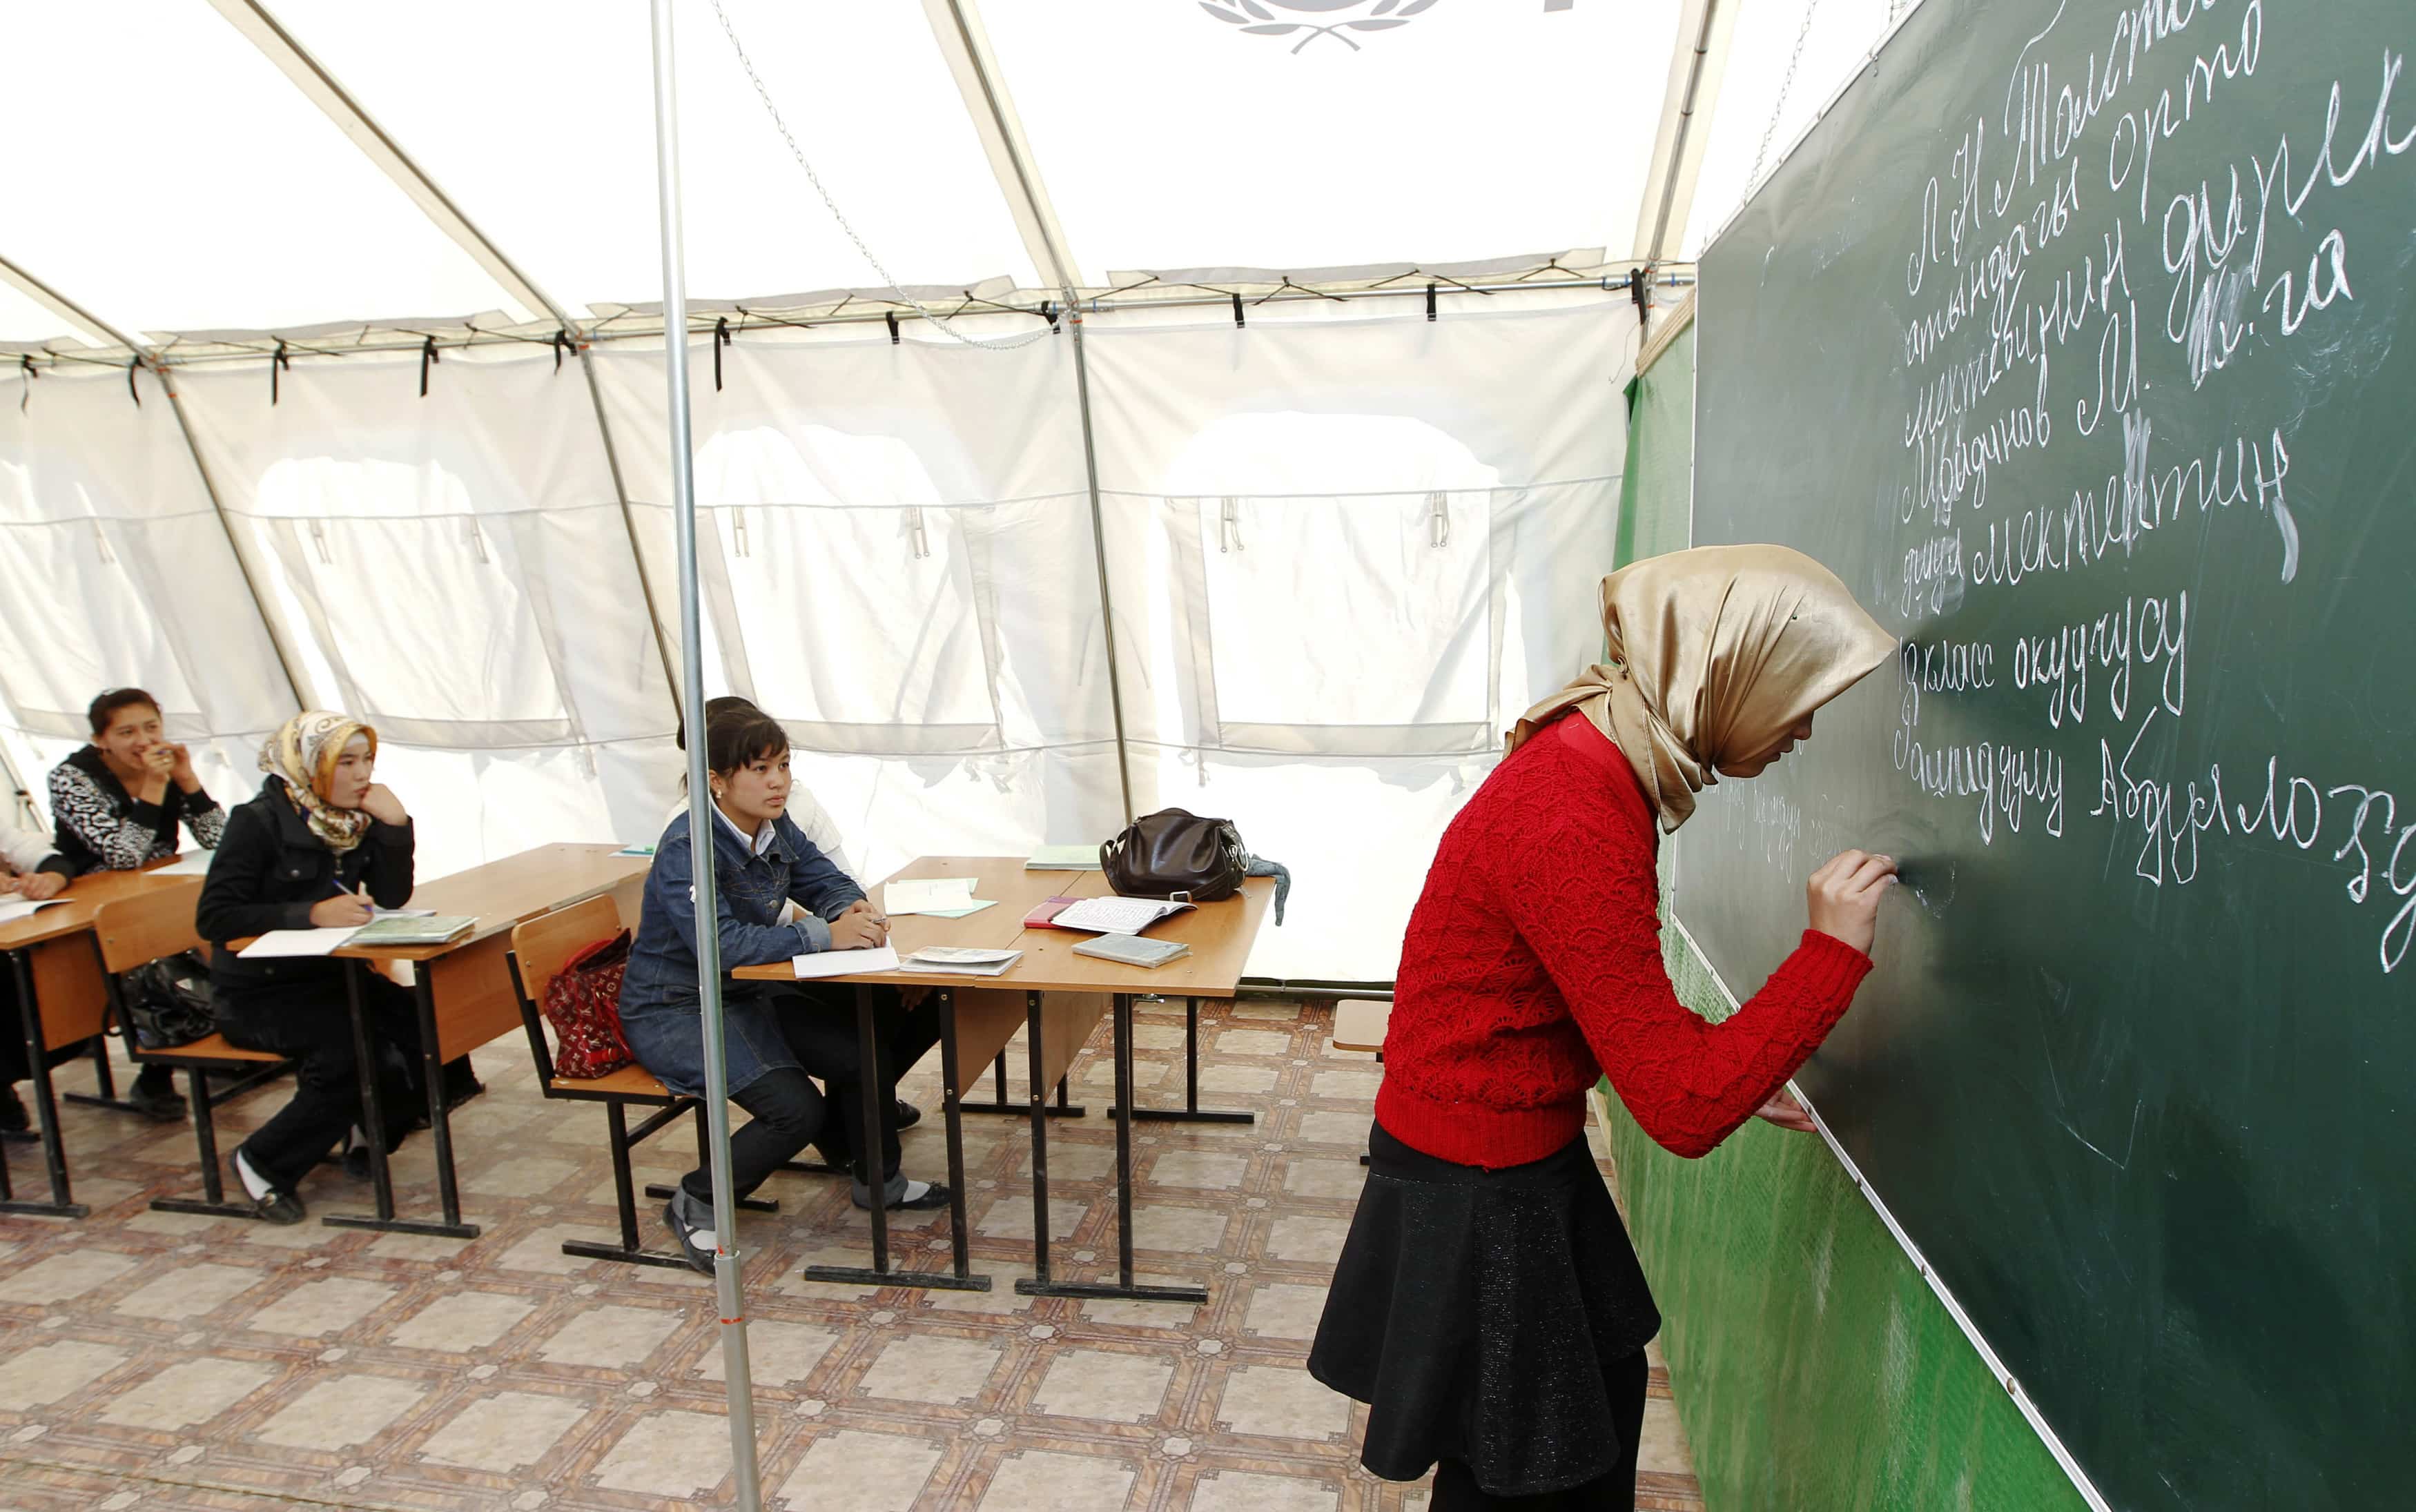 Children attend a lesson at a local school, based in a tent, in the city of Osh, 9 October 2010, REUTERS/Vasily Fedosenko